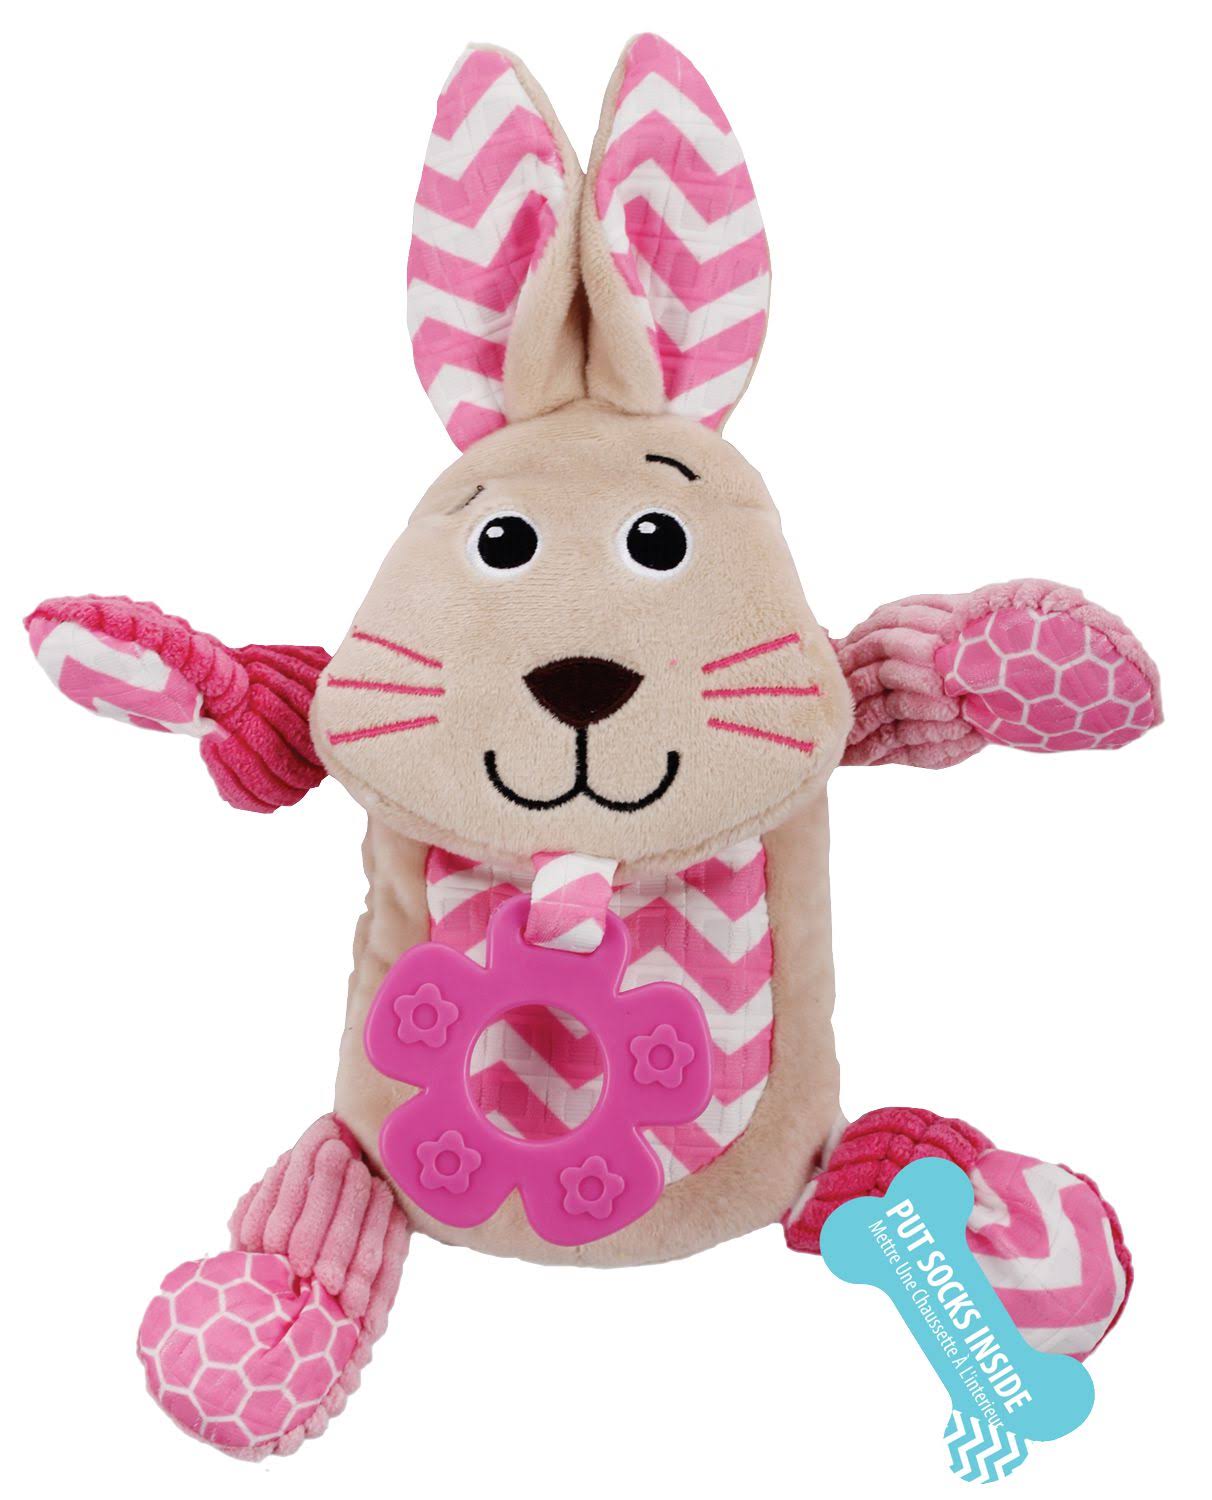 AFP Little Buddy Comforting Plush - Assorted